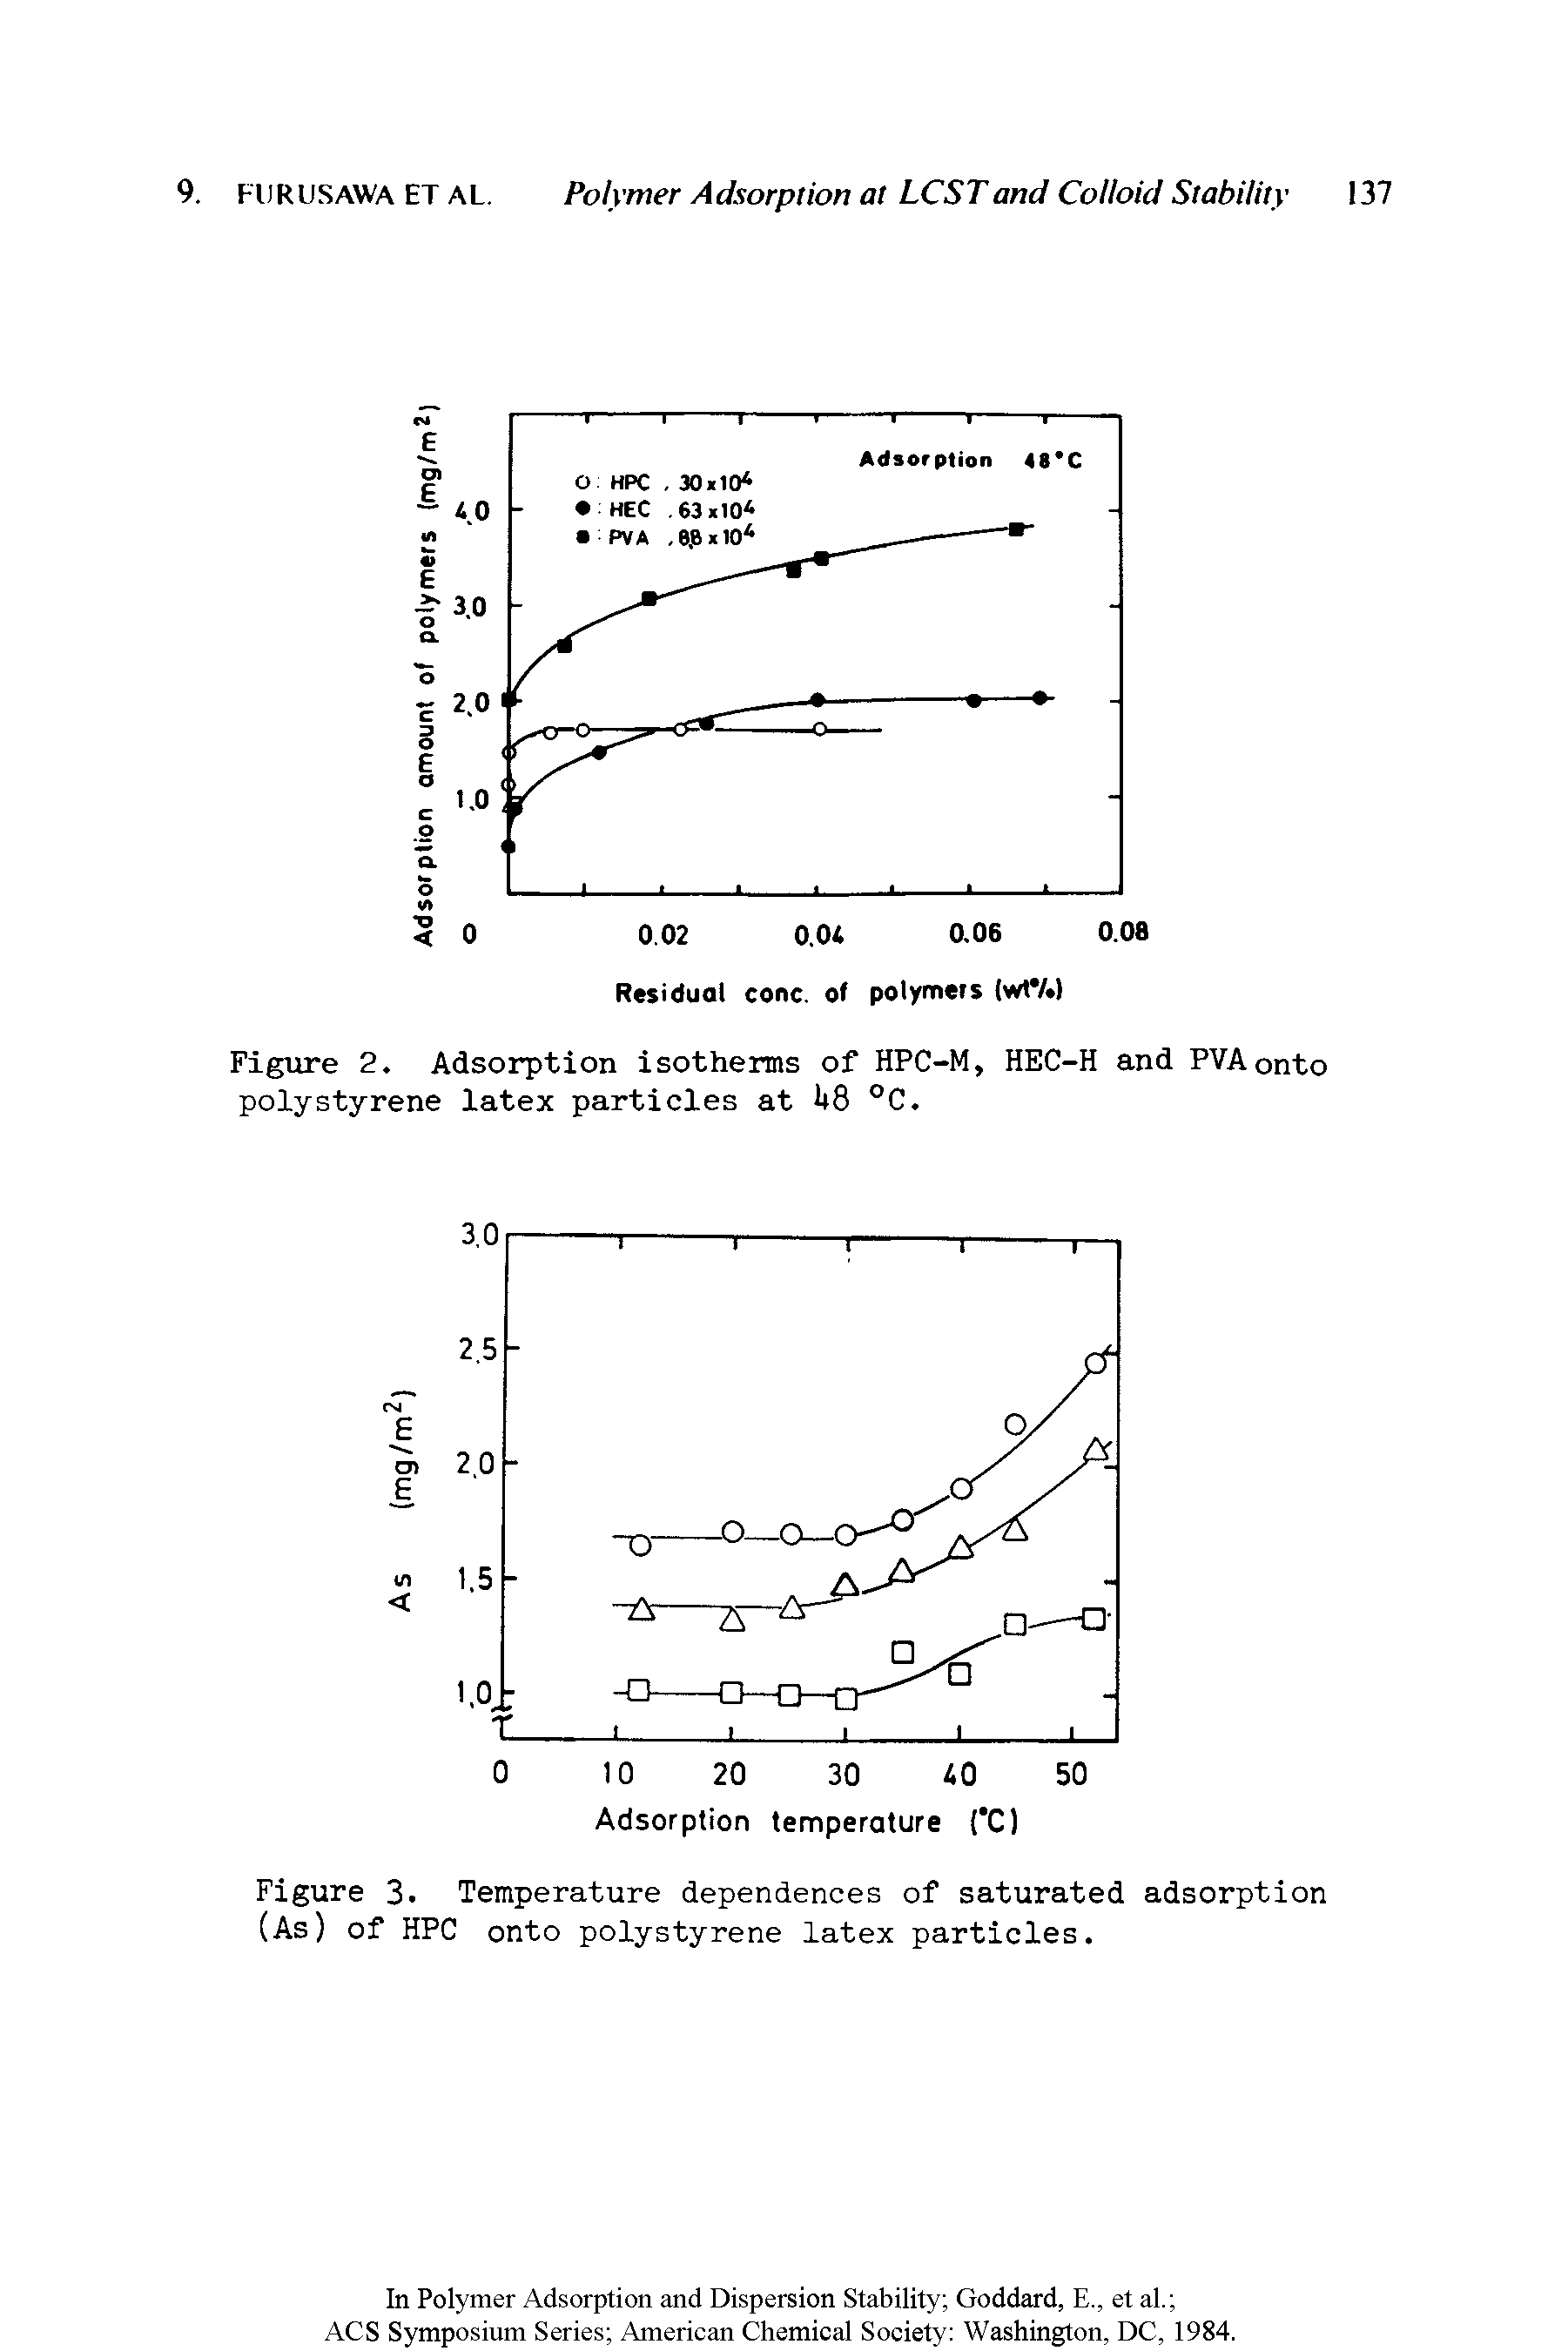 Figure 2. Adsorption isotherms of HPC-M, HEC-H and PVAonto polystyrene latex particles at 1 8 °C.